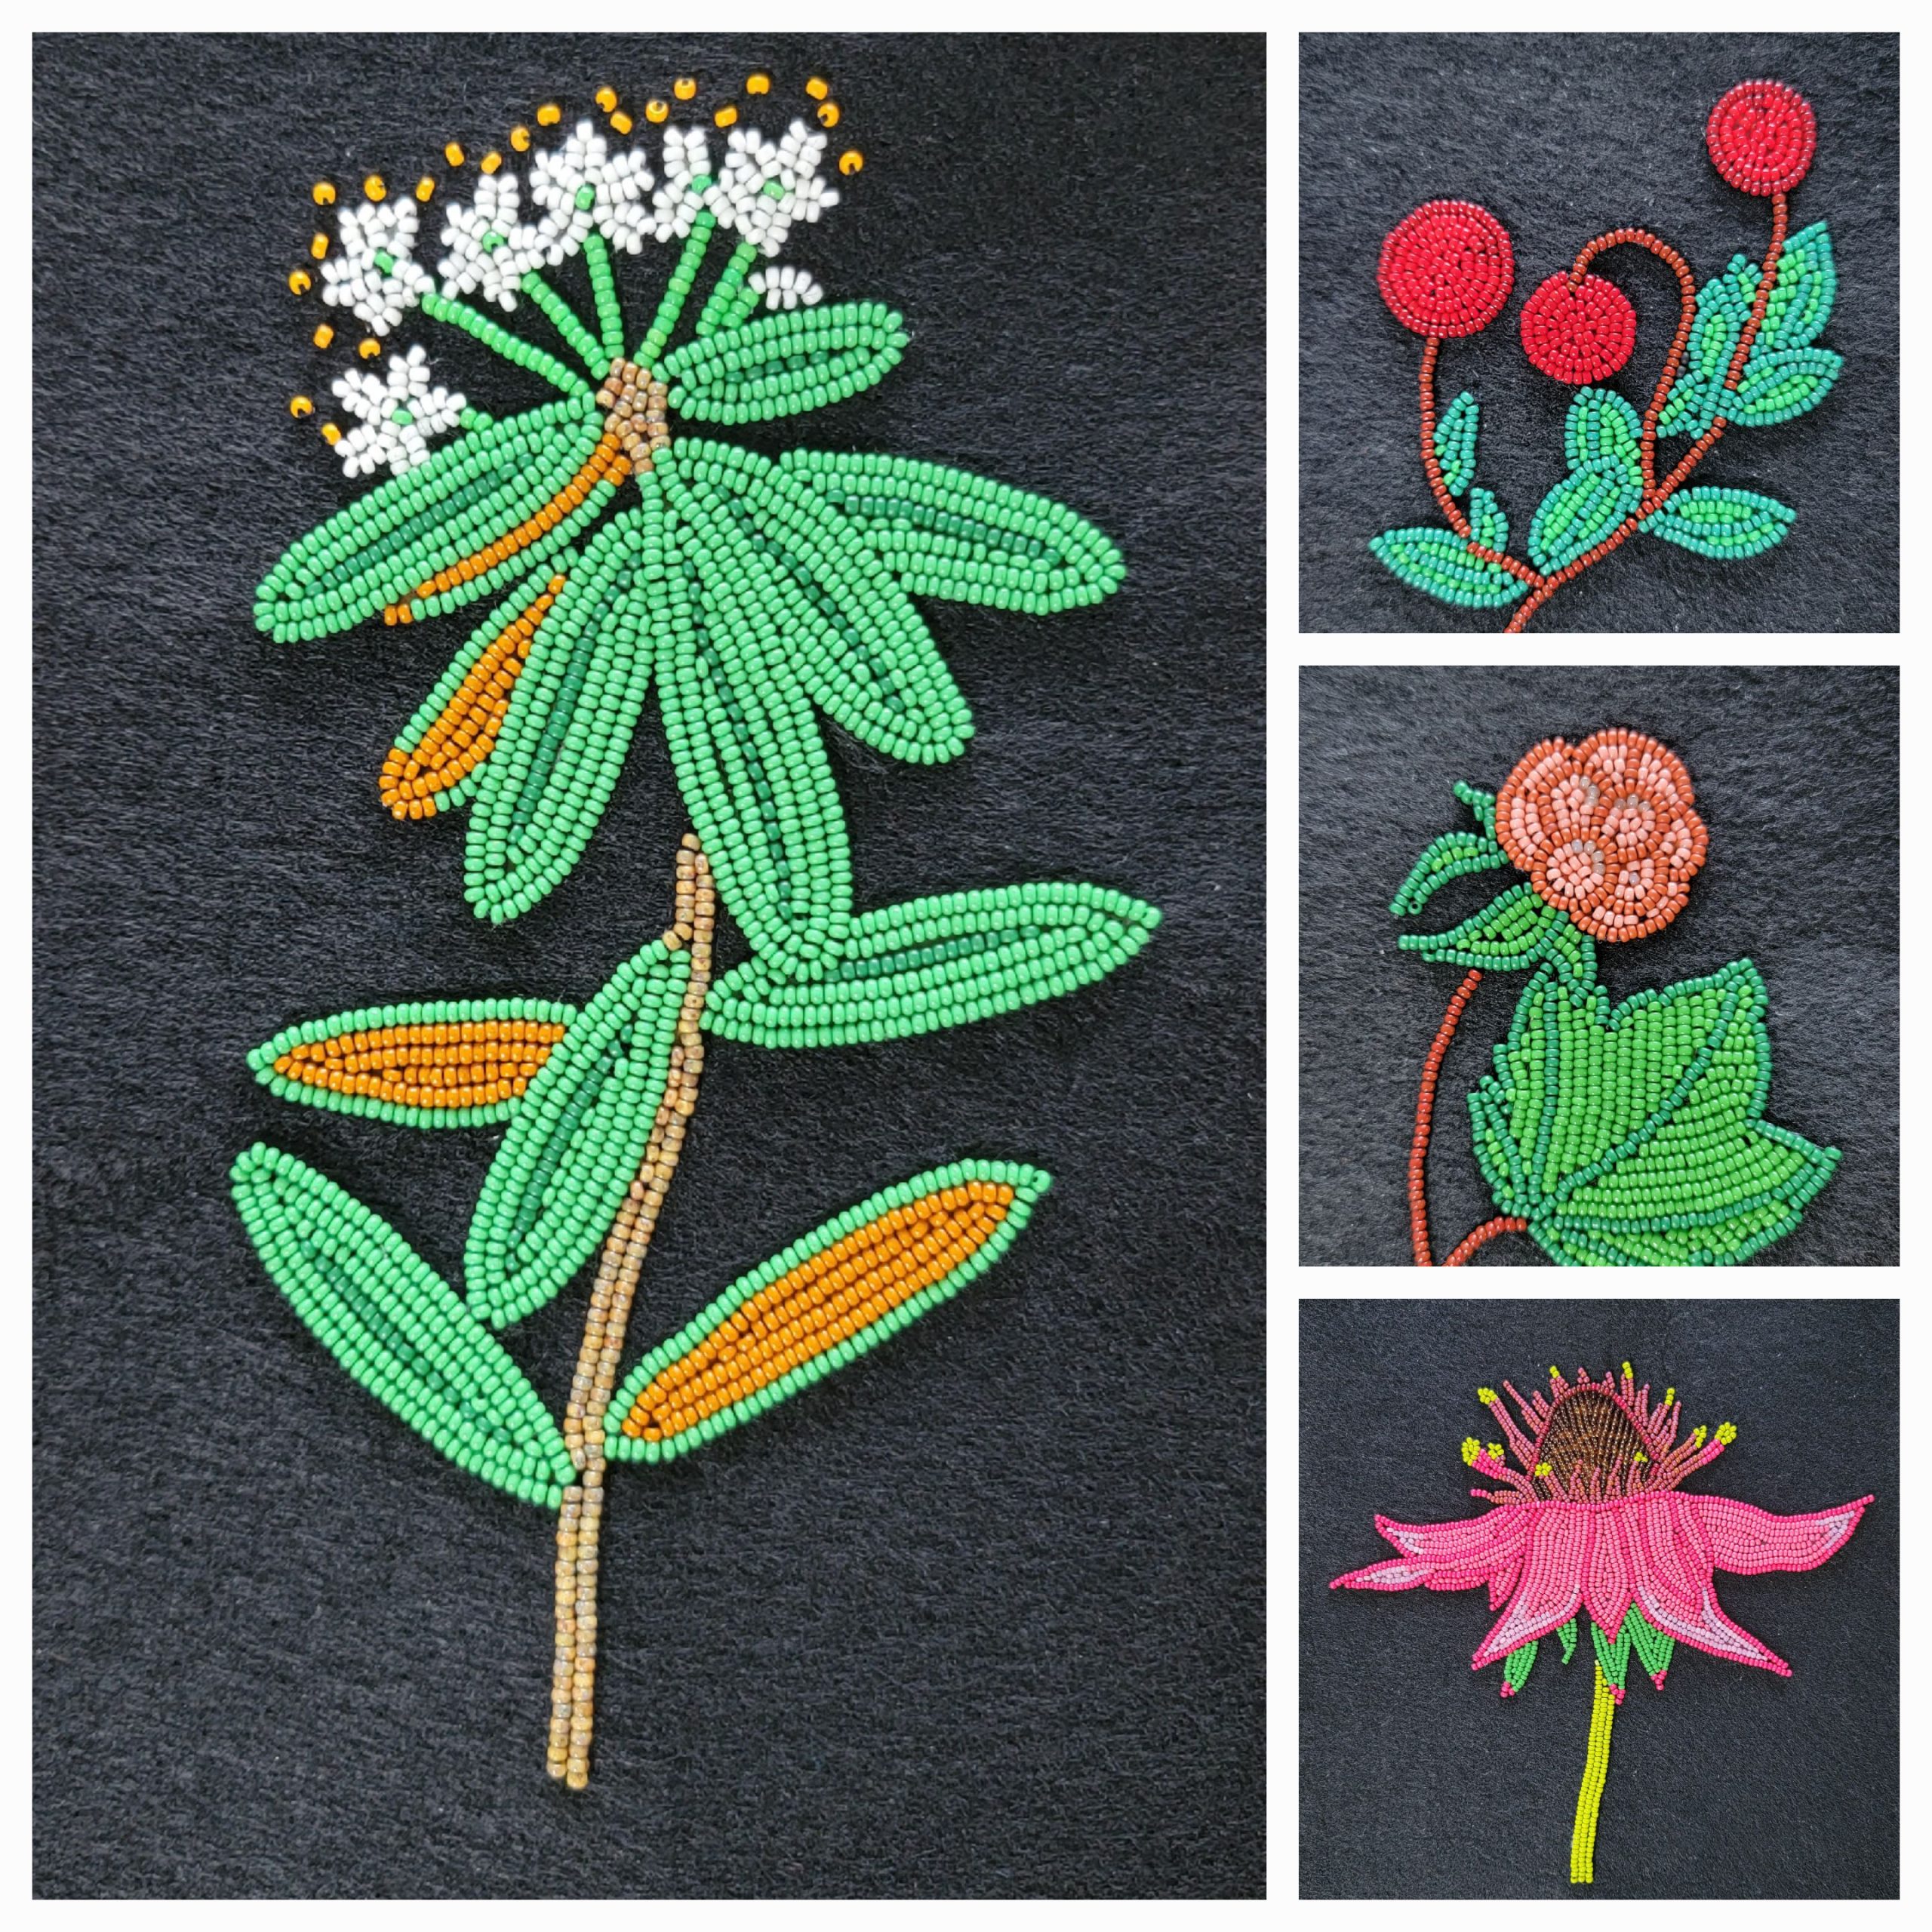 An image of several flowers and plants created using beads on textile